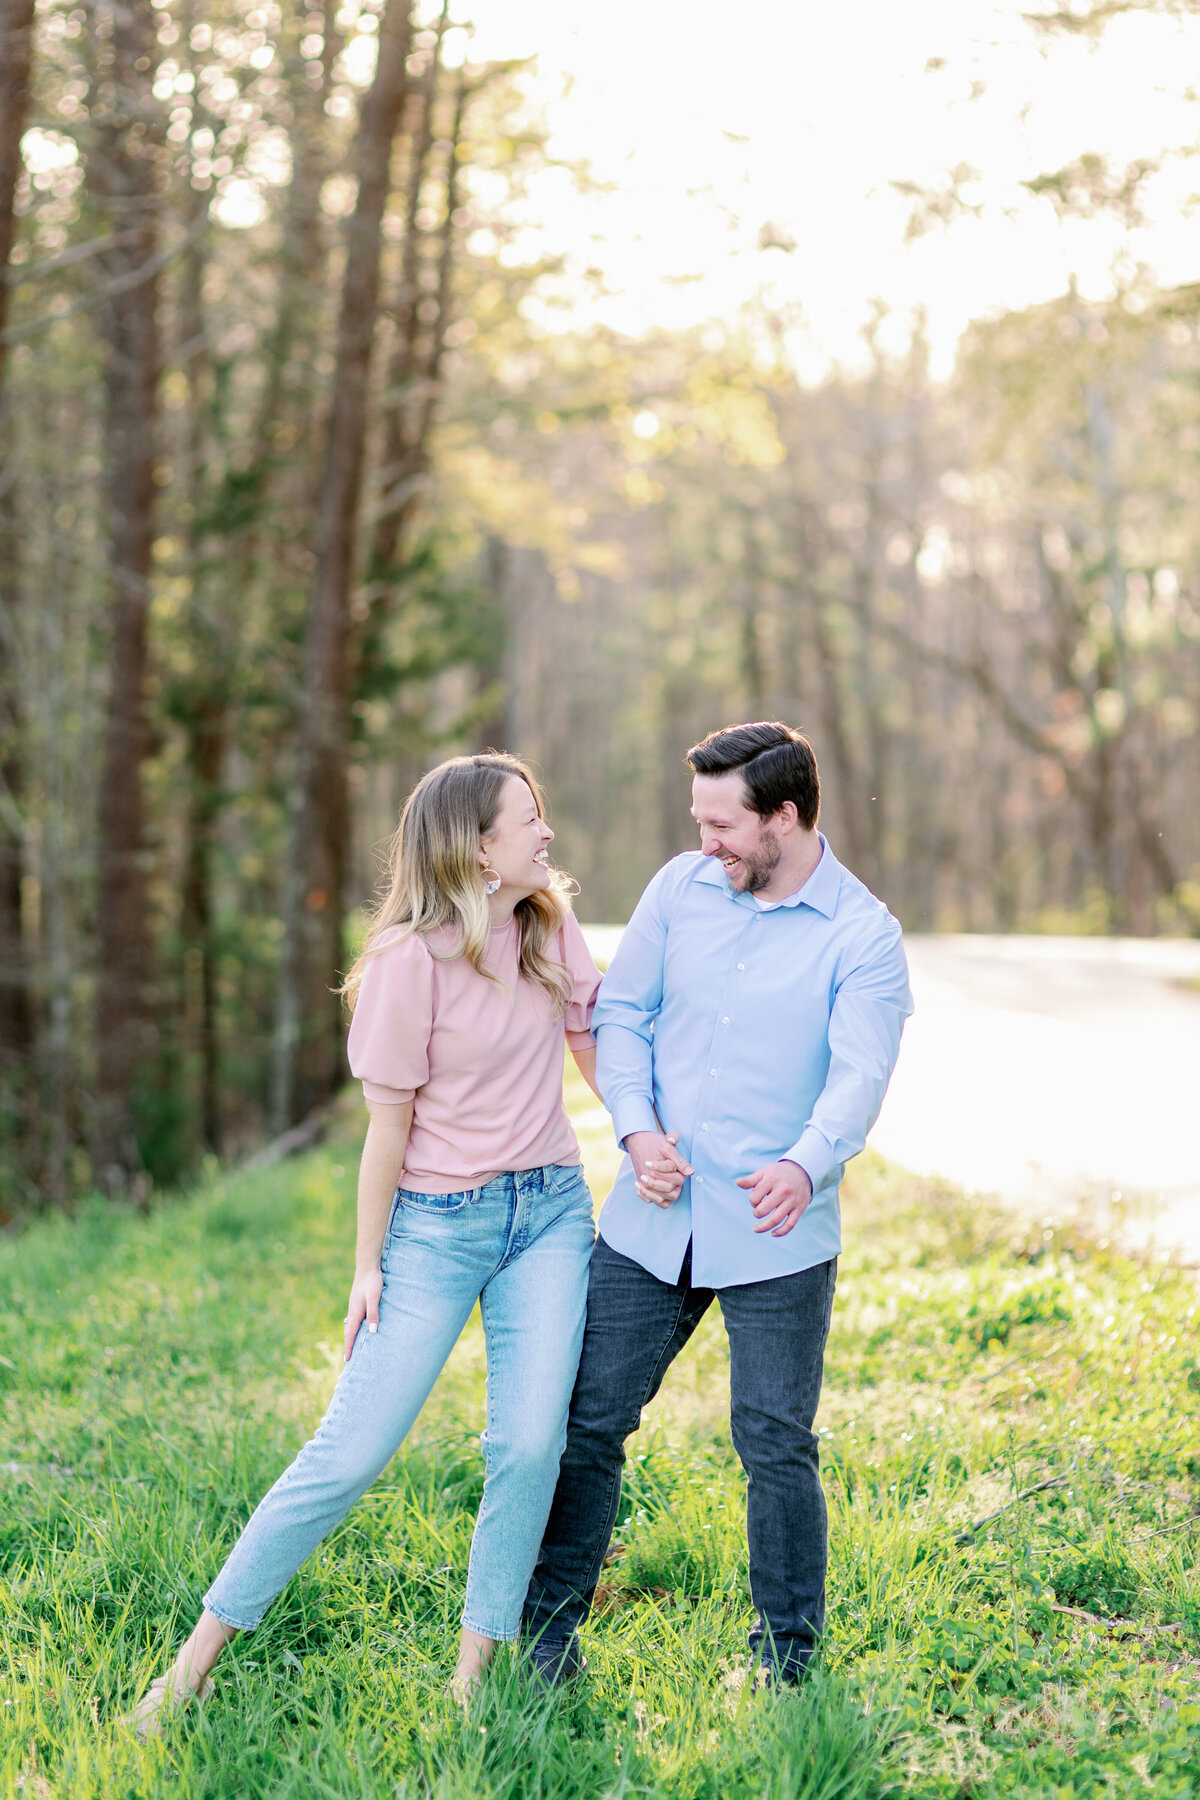 Alyssa and Craig Moutain Engagement - FootHills Parkway - East Tennessee Wedding Photographer - Alaina René Photogrphy-49